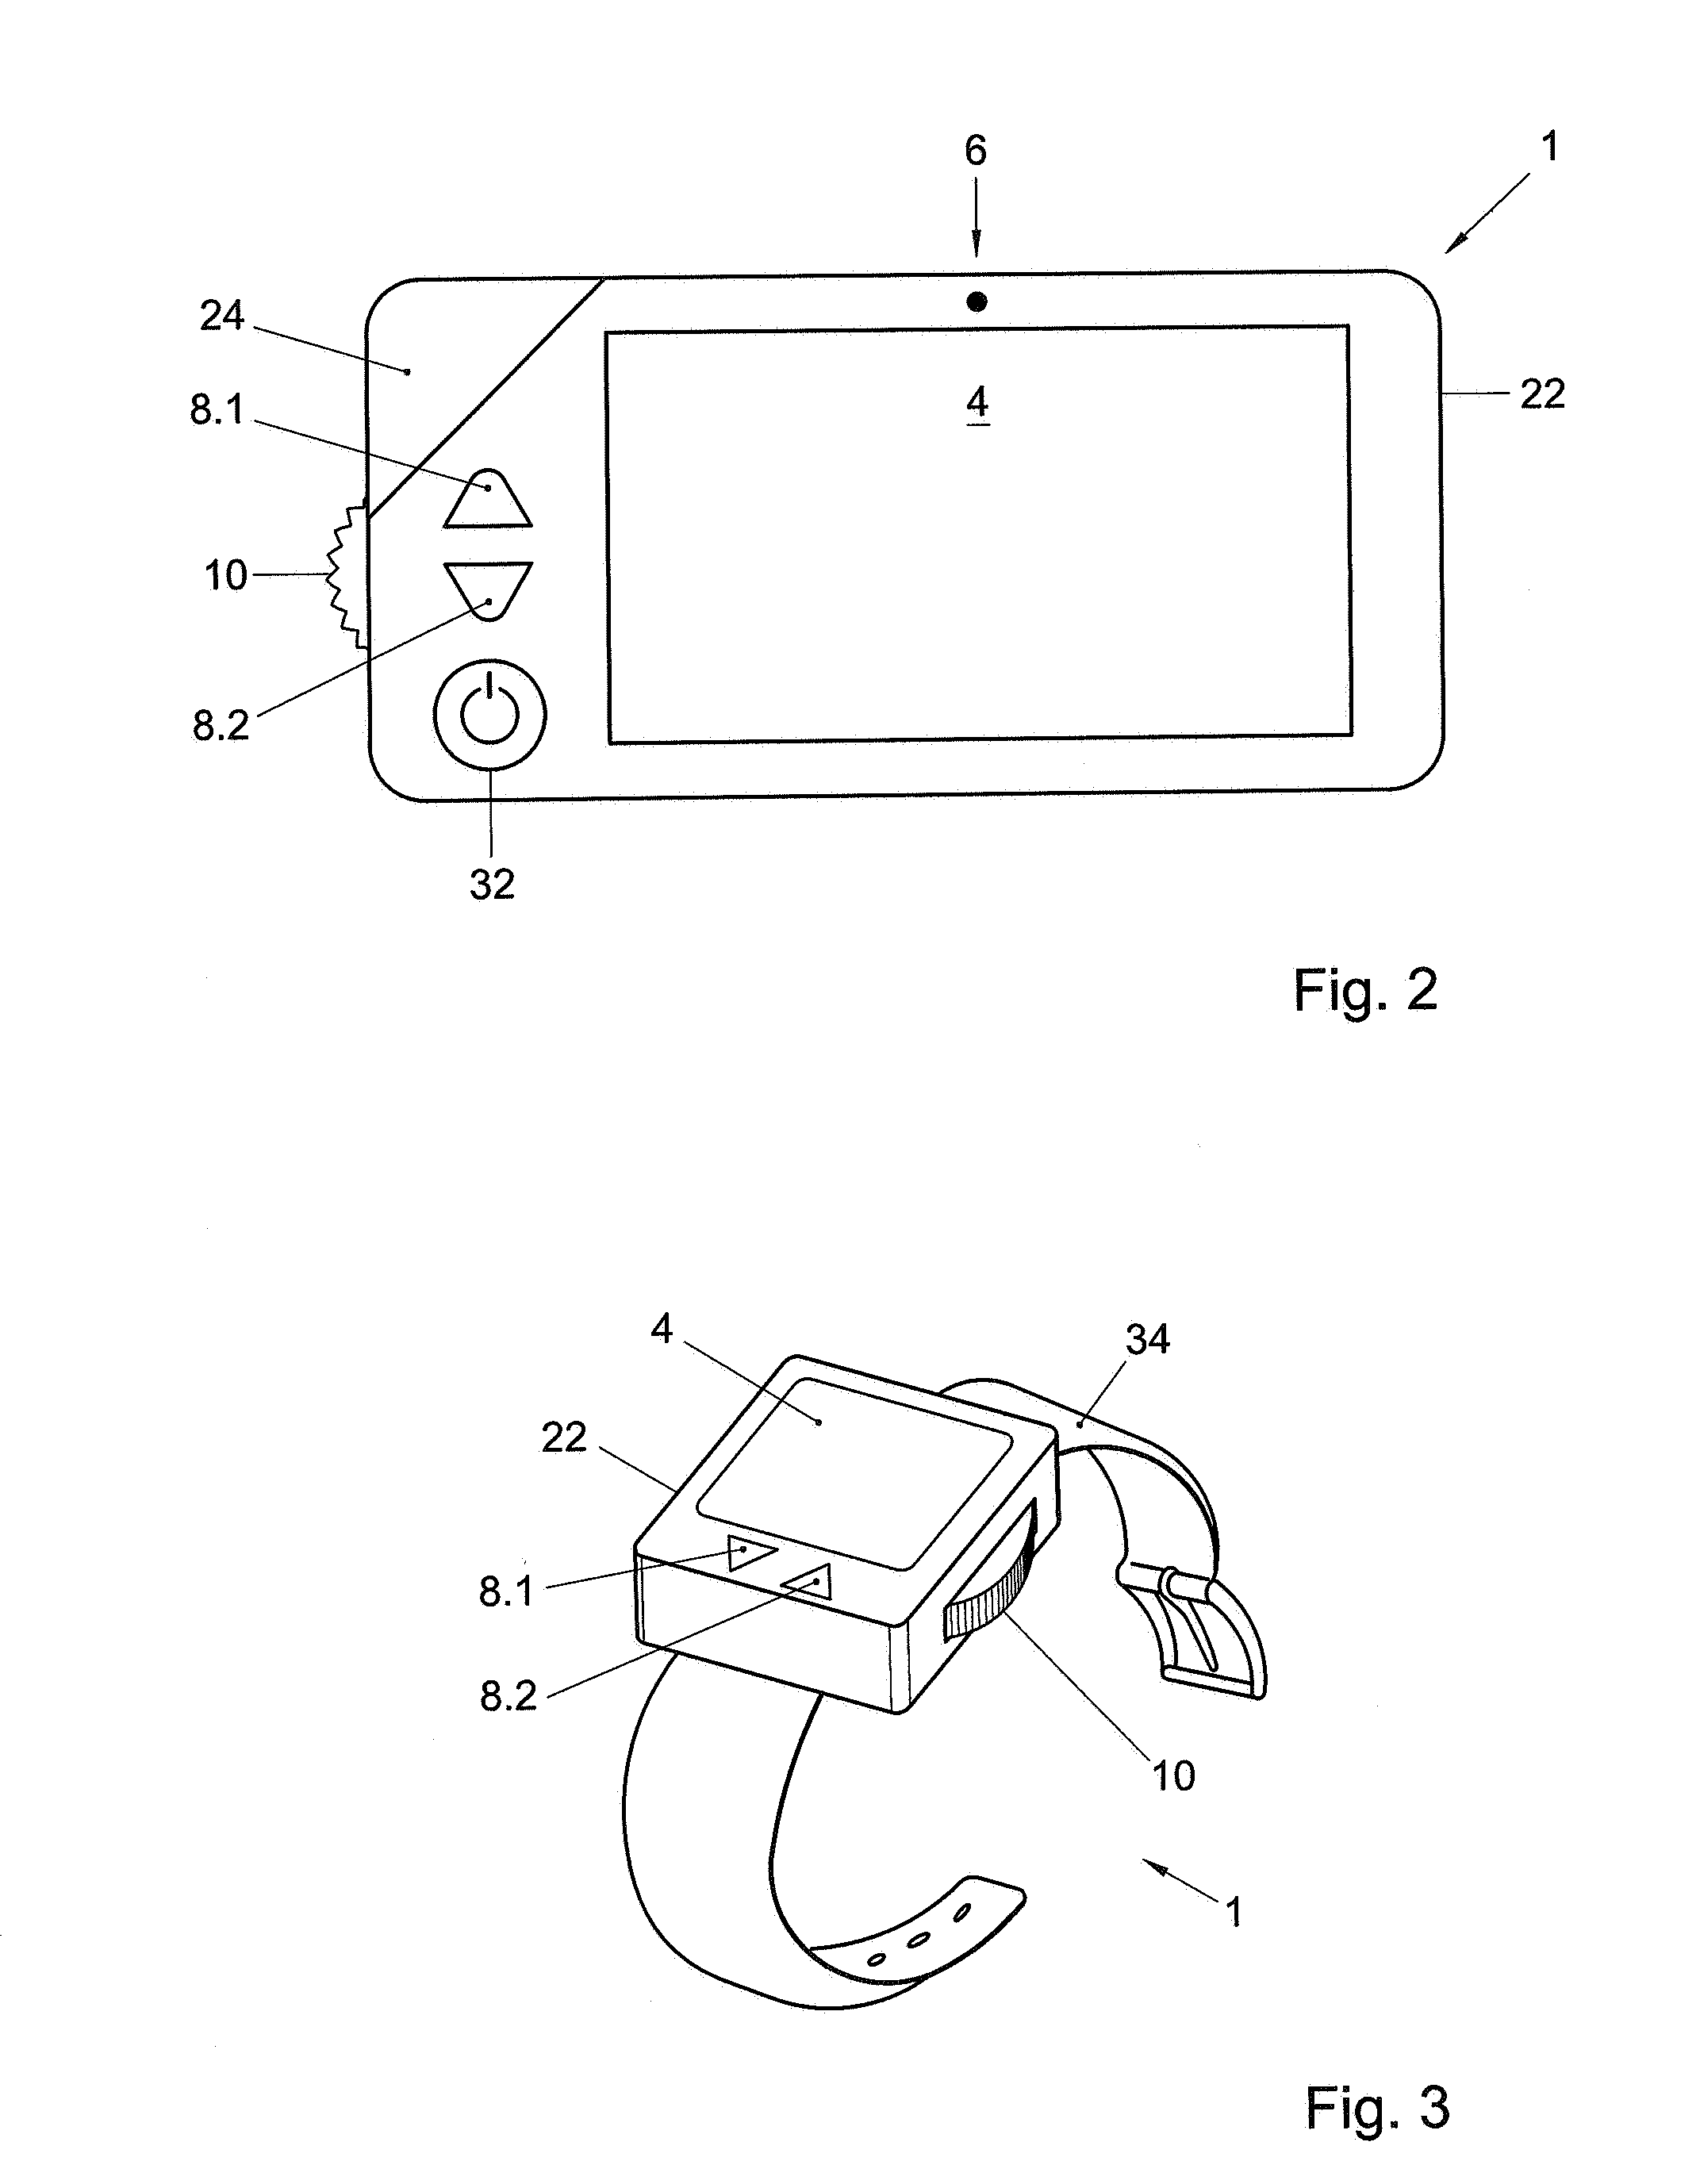 Portable psychological monitoring device